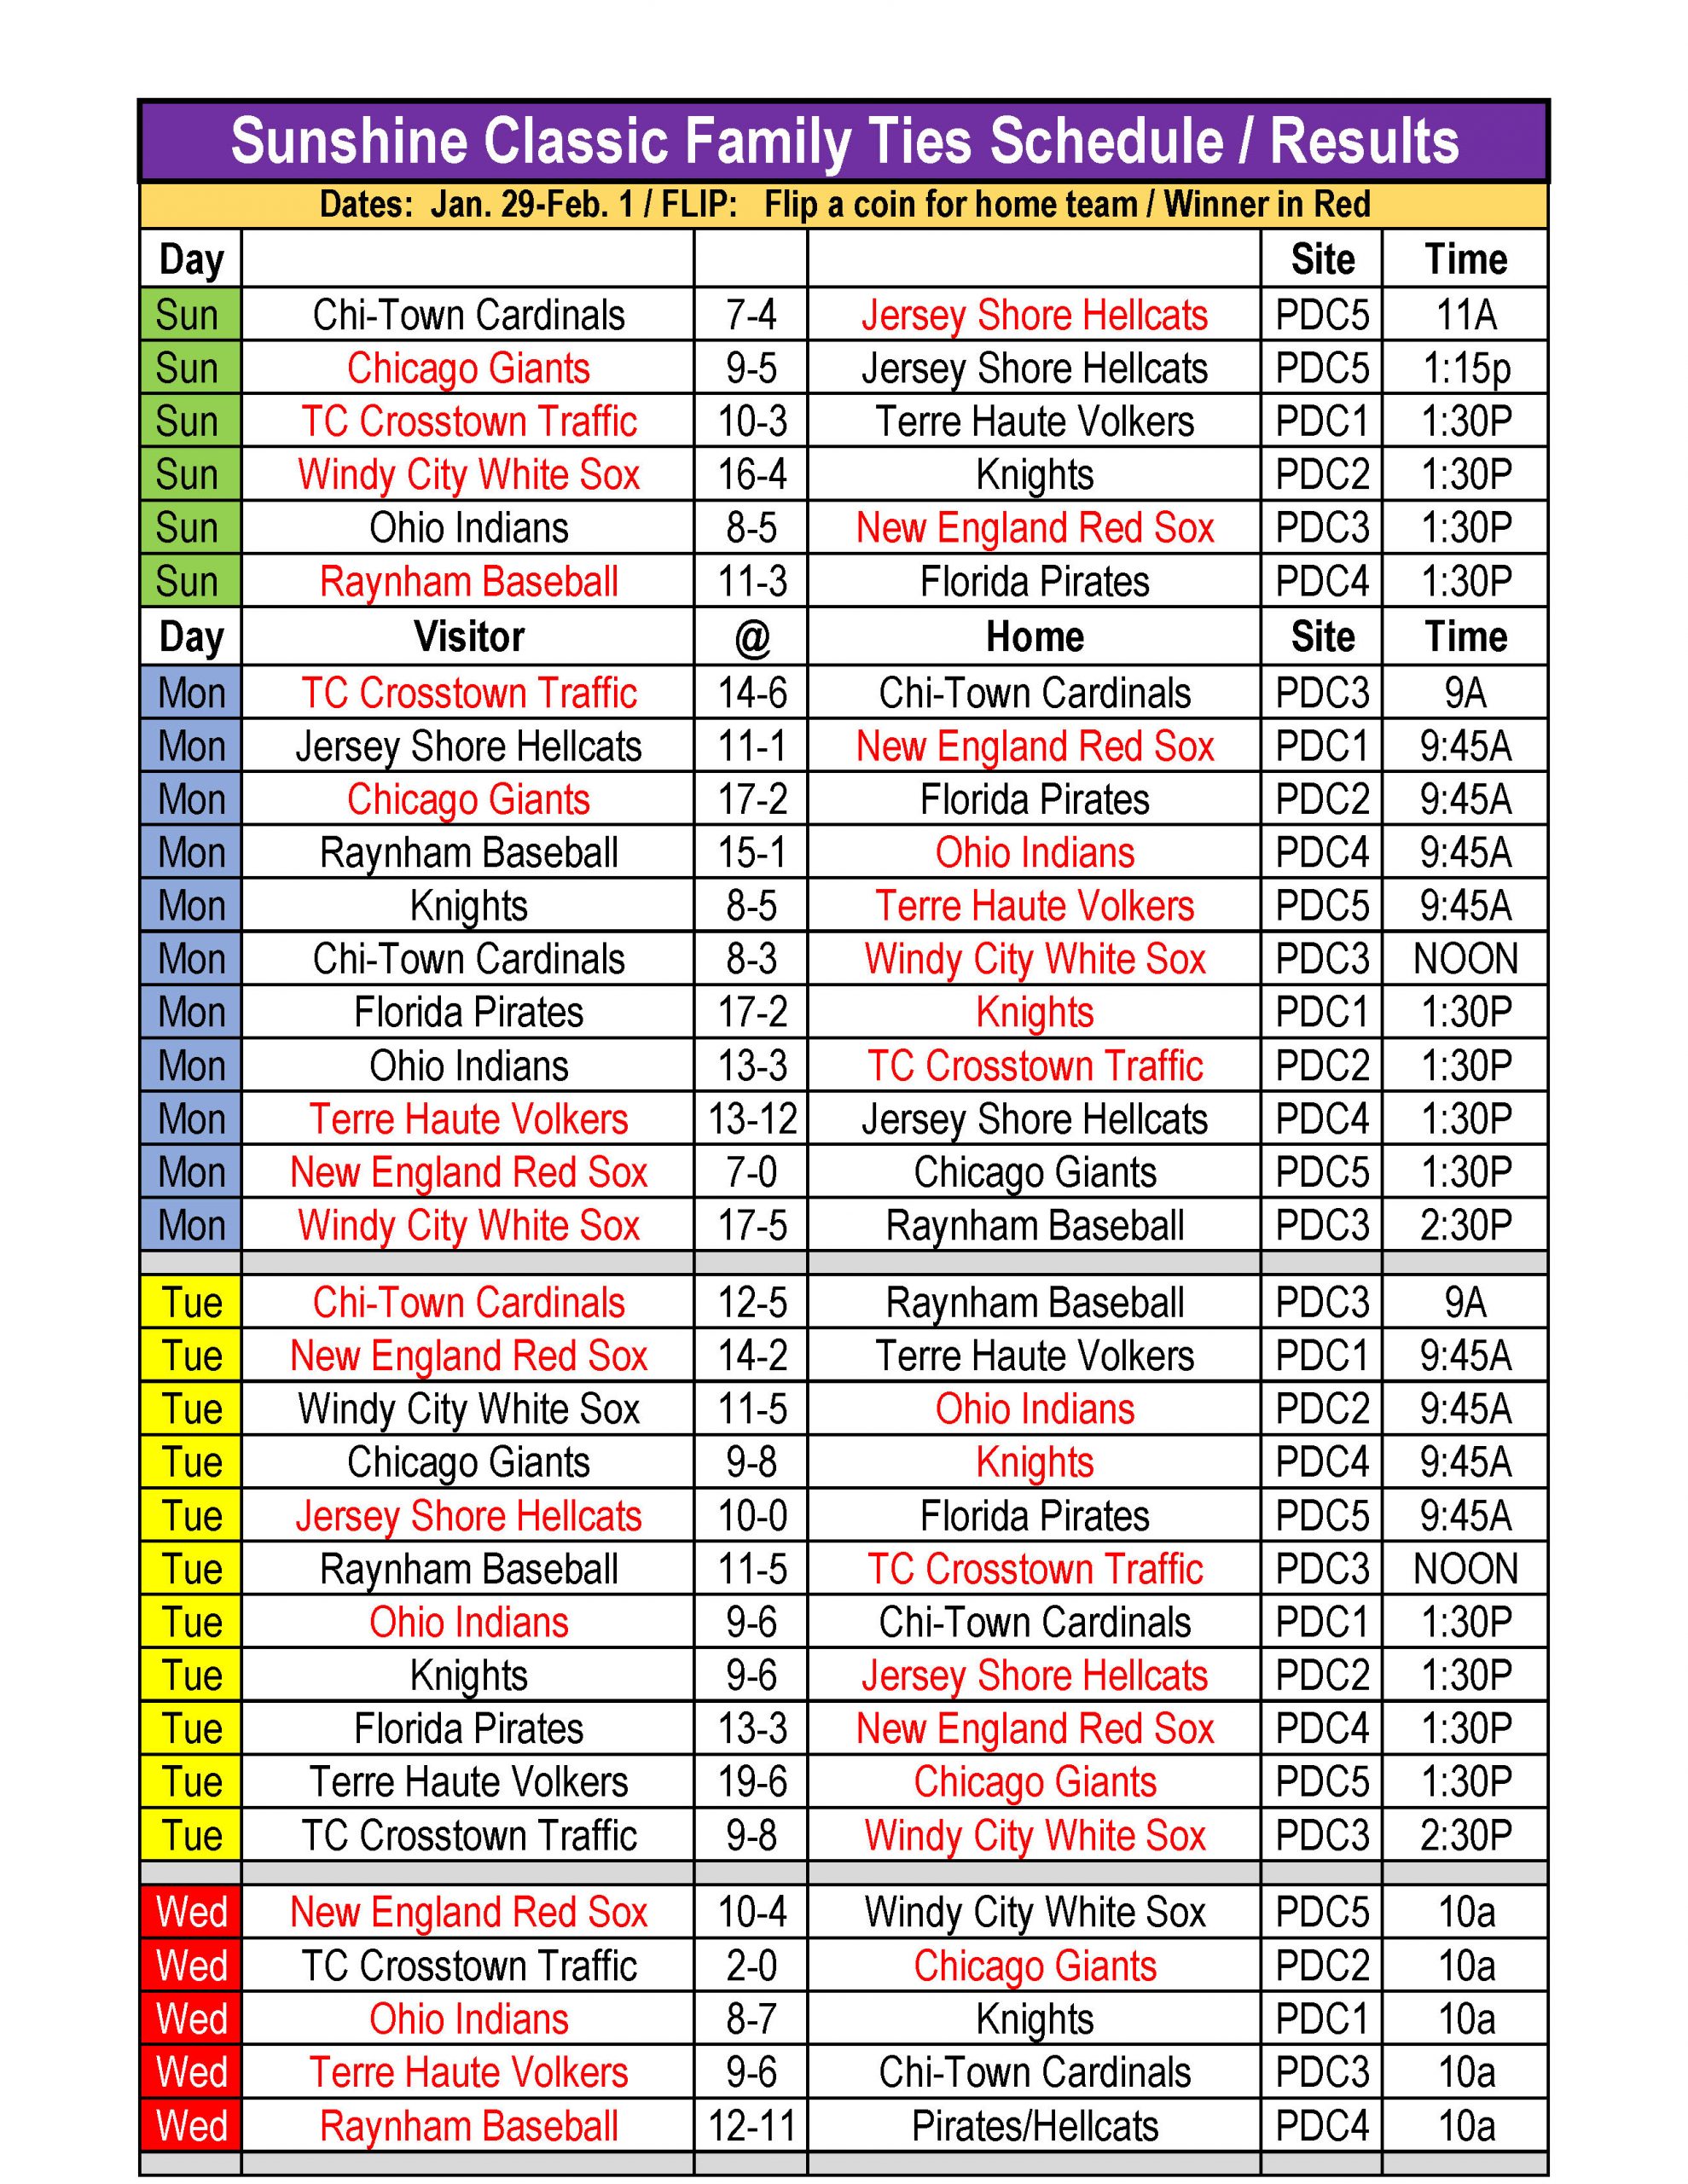 Family Ties Schedule and Results